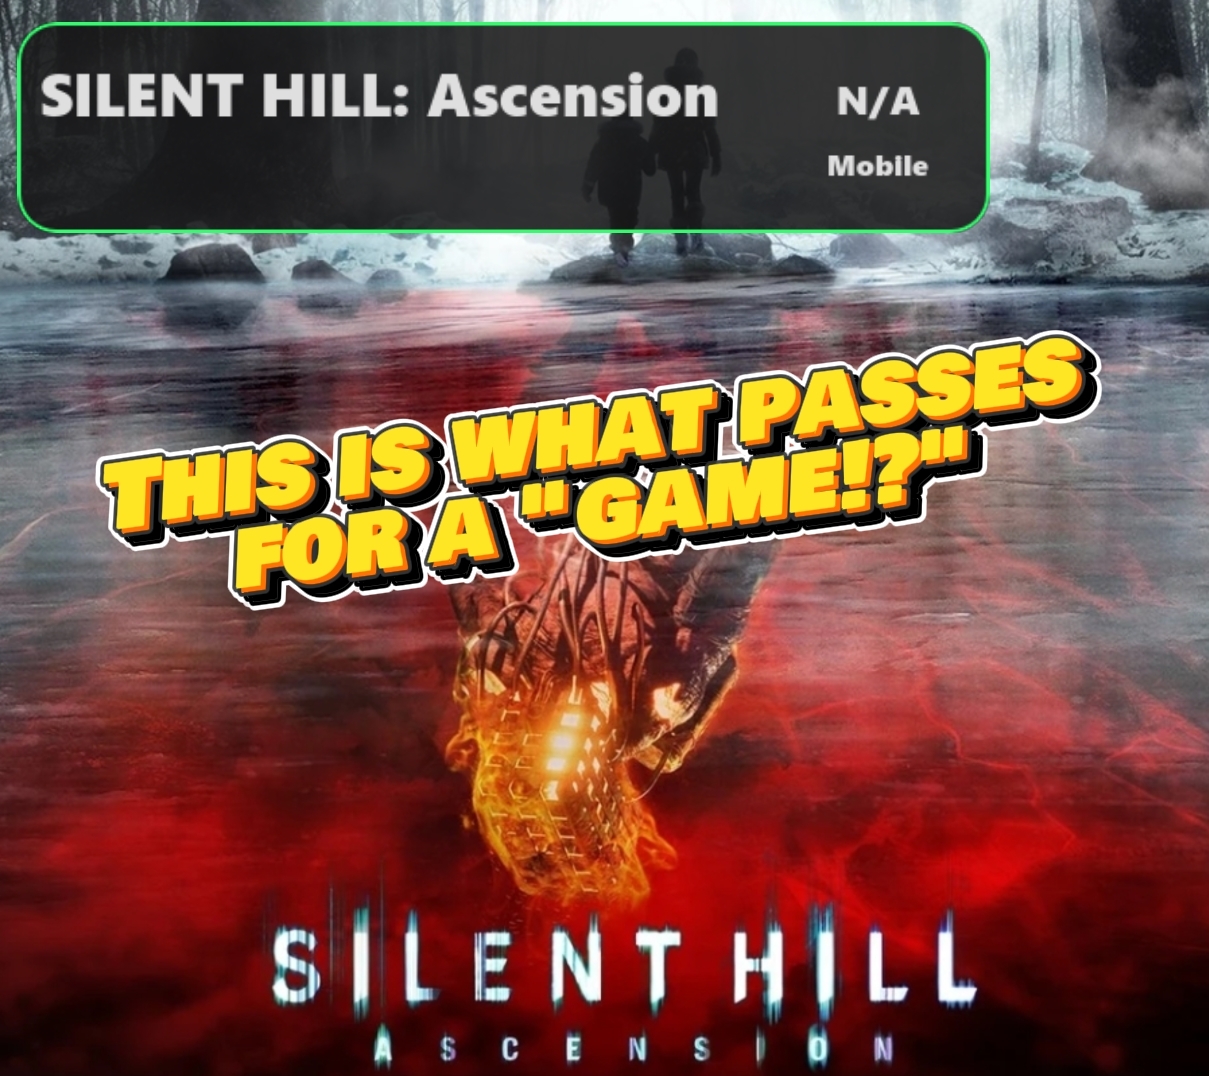 Silent Hill: Ascension' season pass criticised for points influencing